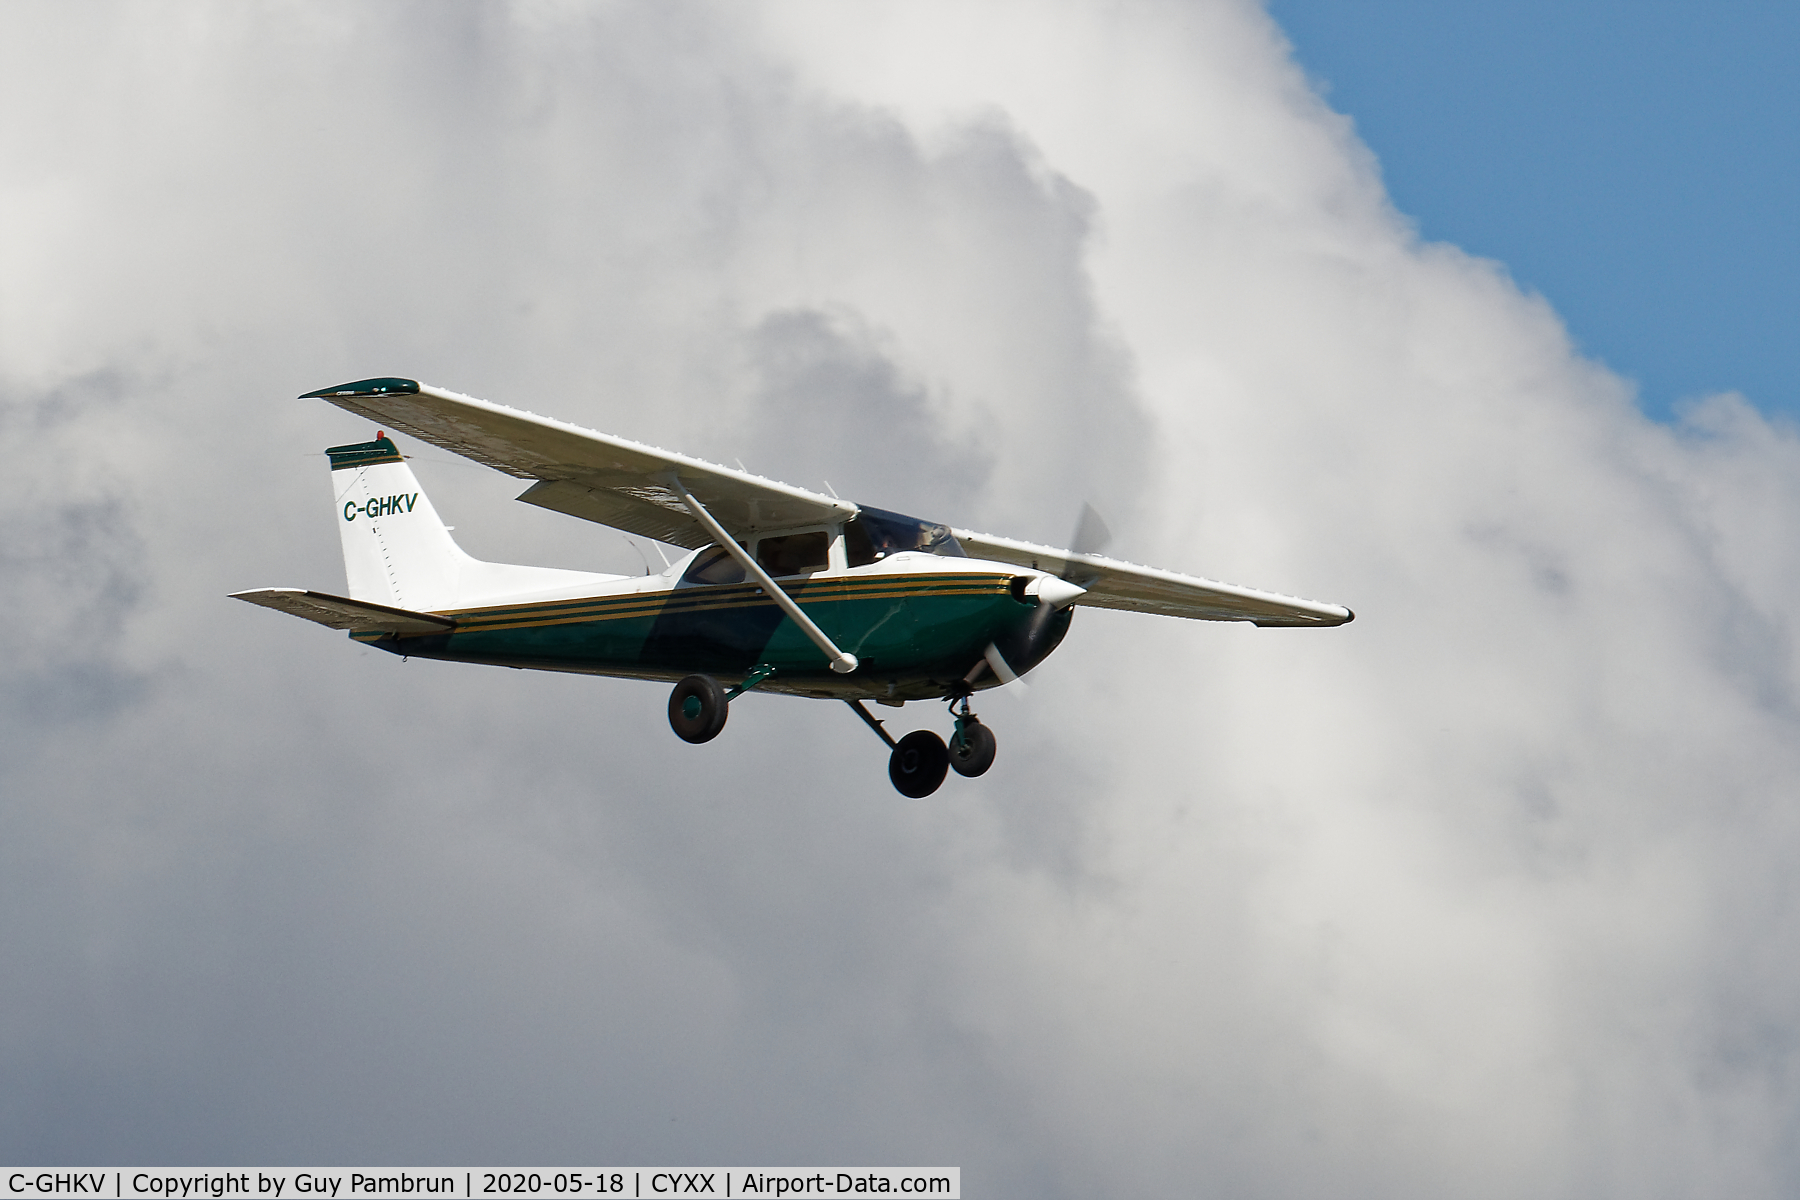 C-GHKV, 1975 Cessna 172M C/N 17264652, Landing on 19 for pilot briefing and departure to take part in 